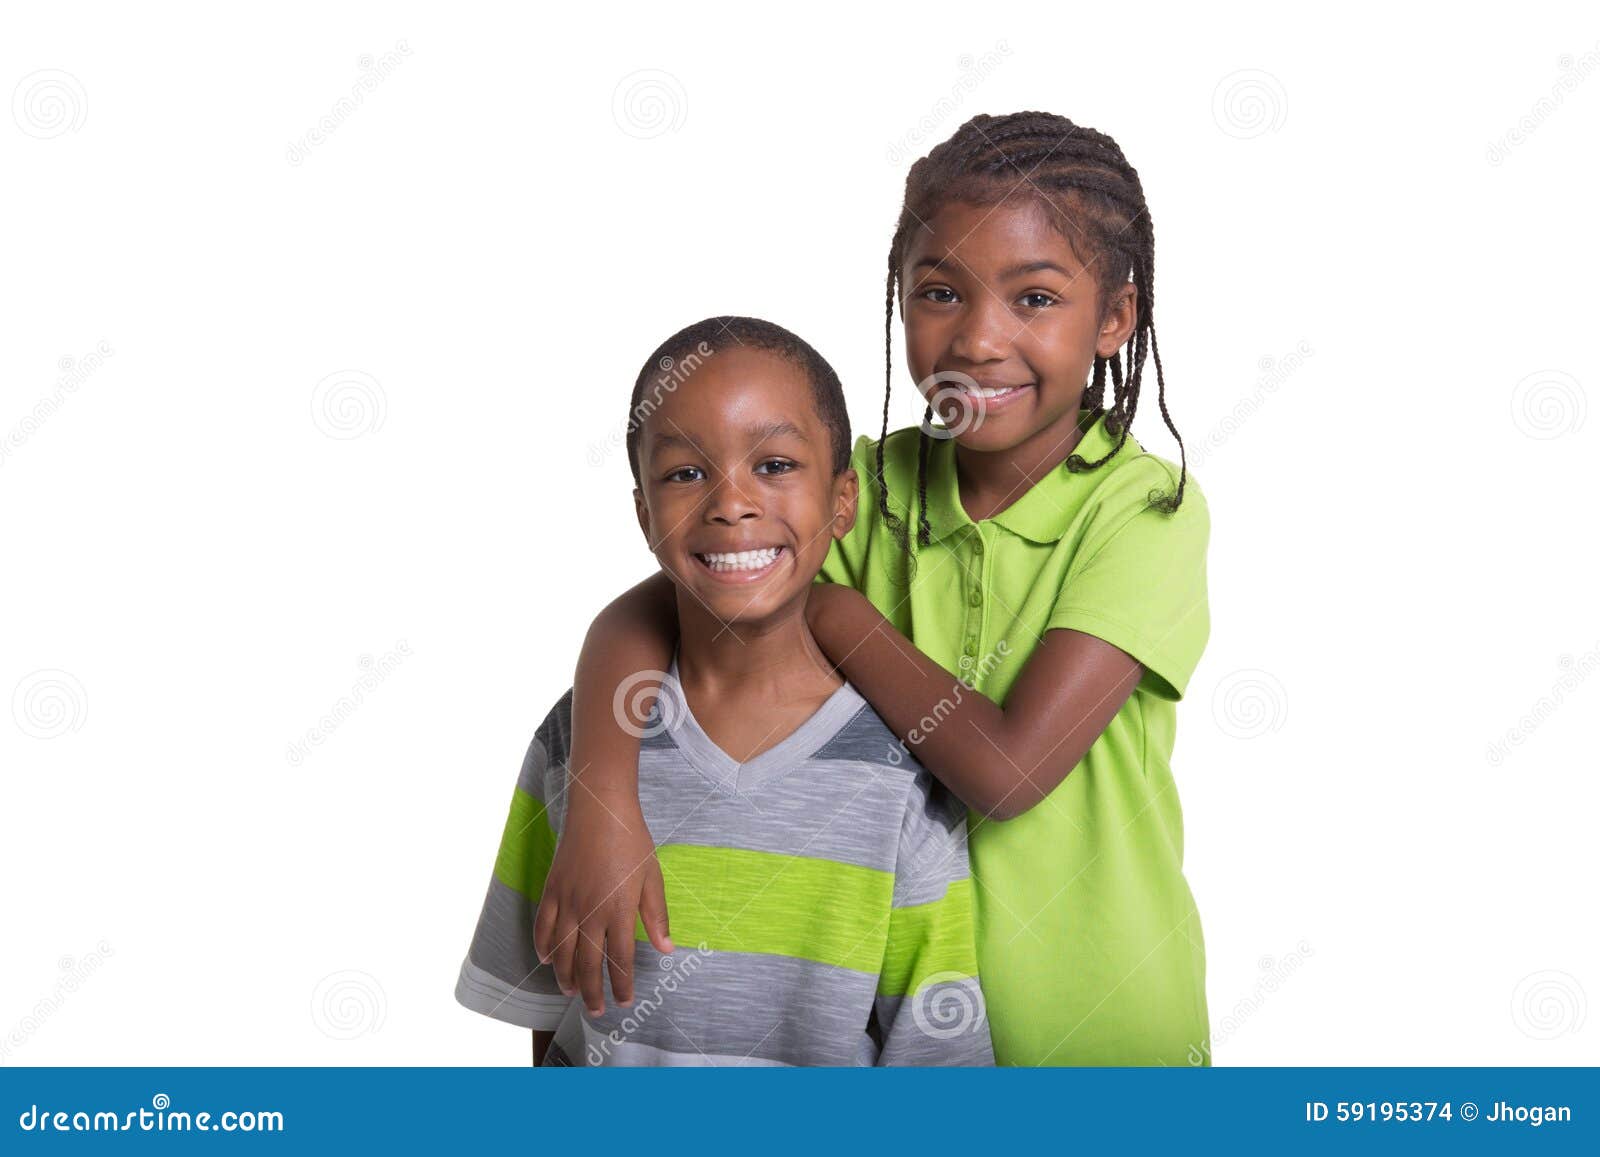 portrait of 2 young siblings